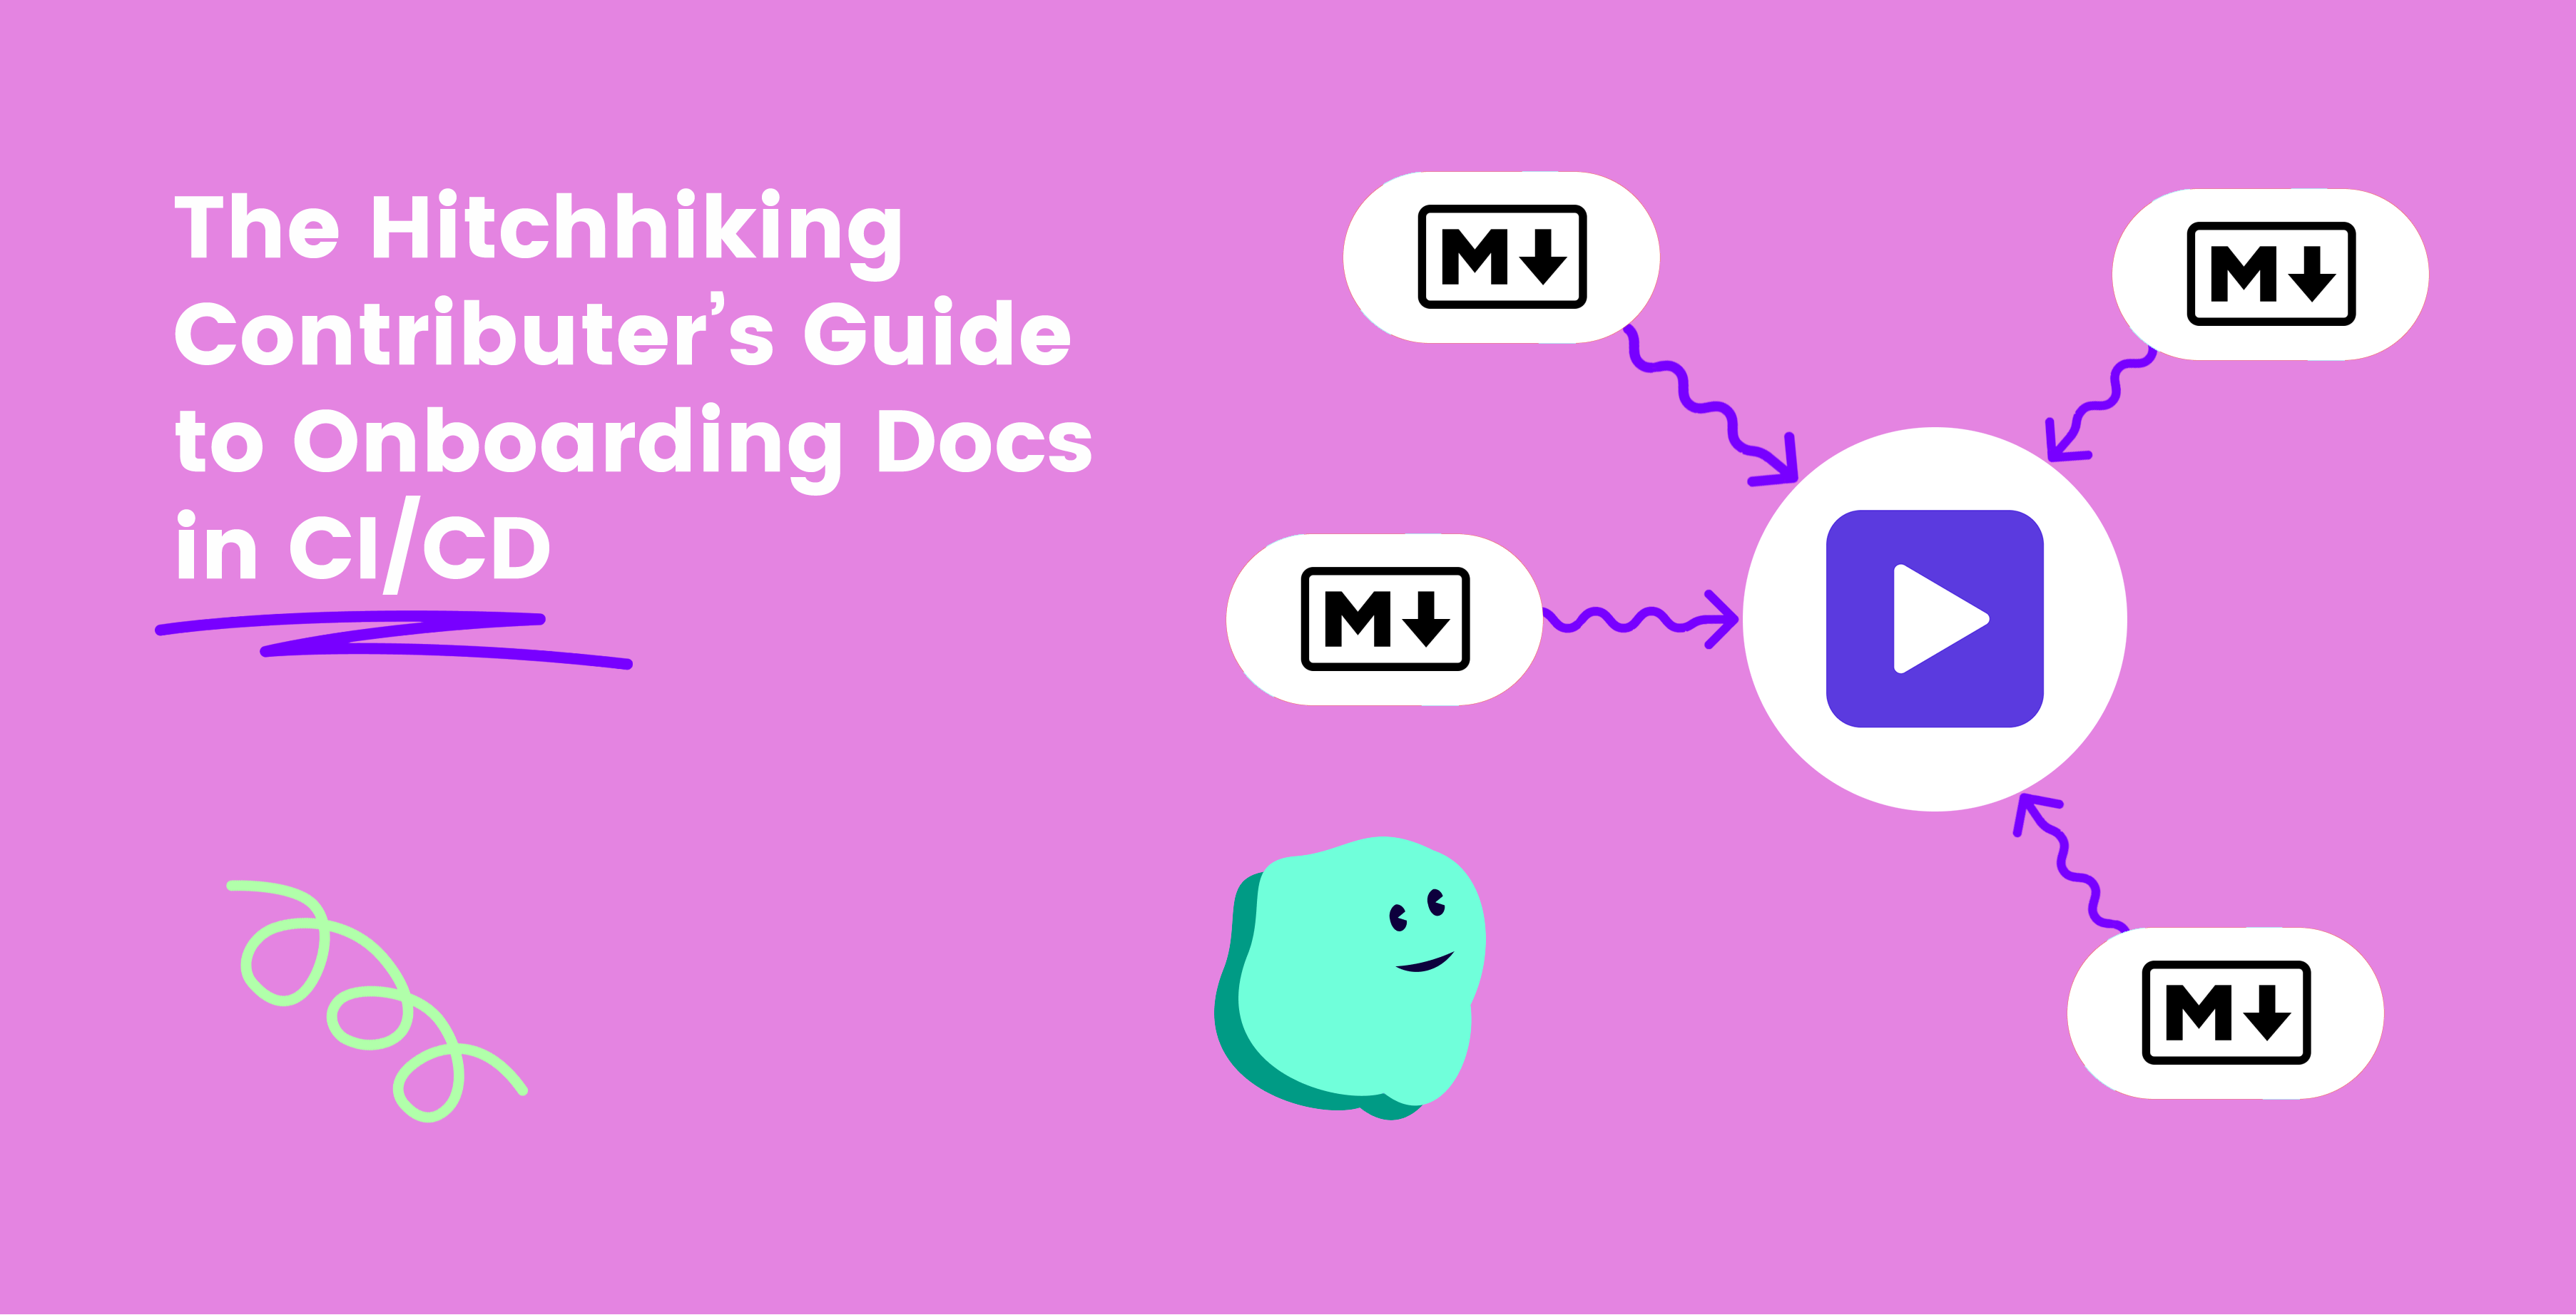 The Hitchhiking Contributor’s Guide to Onboarding Docs in CI/CD